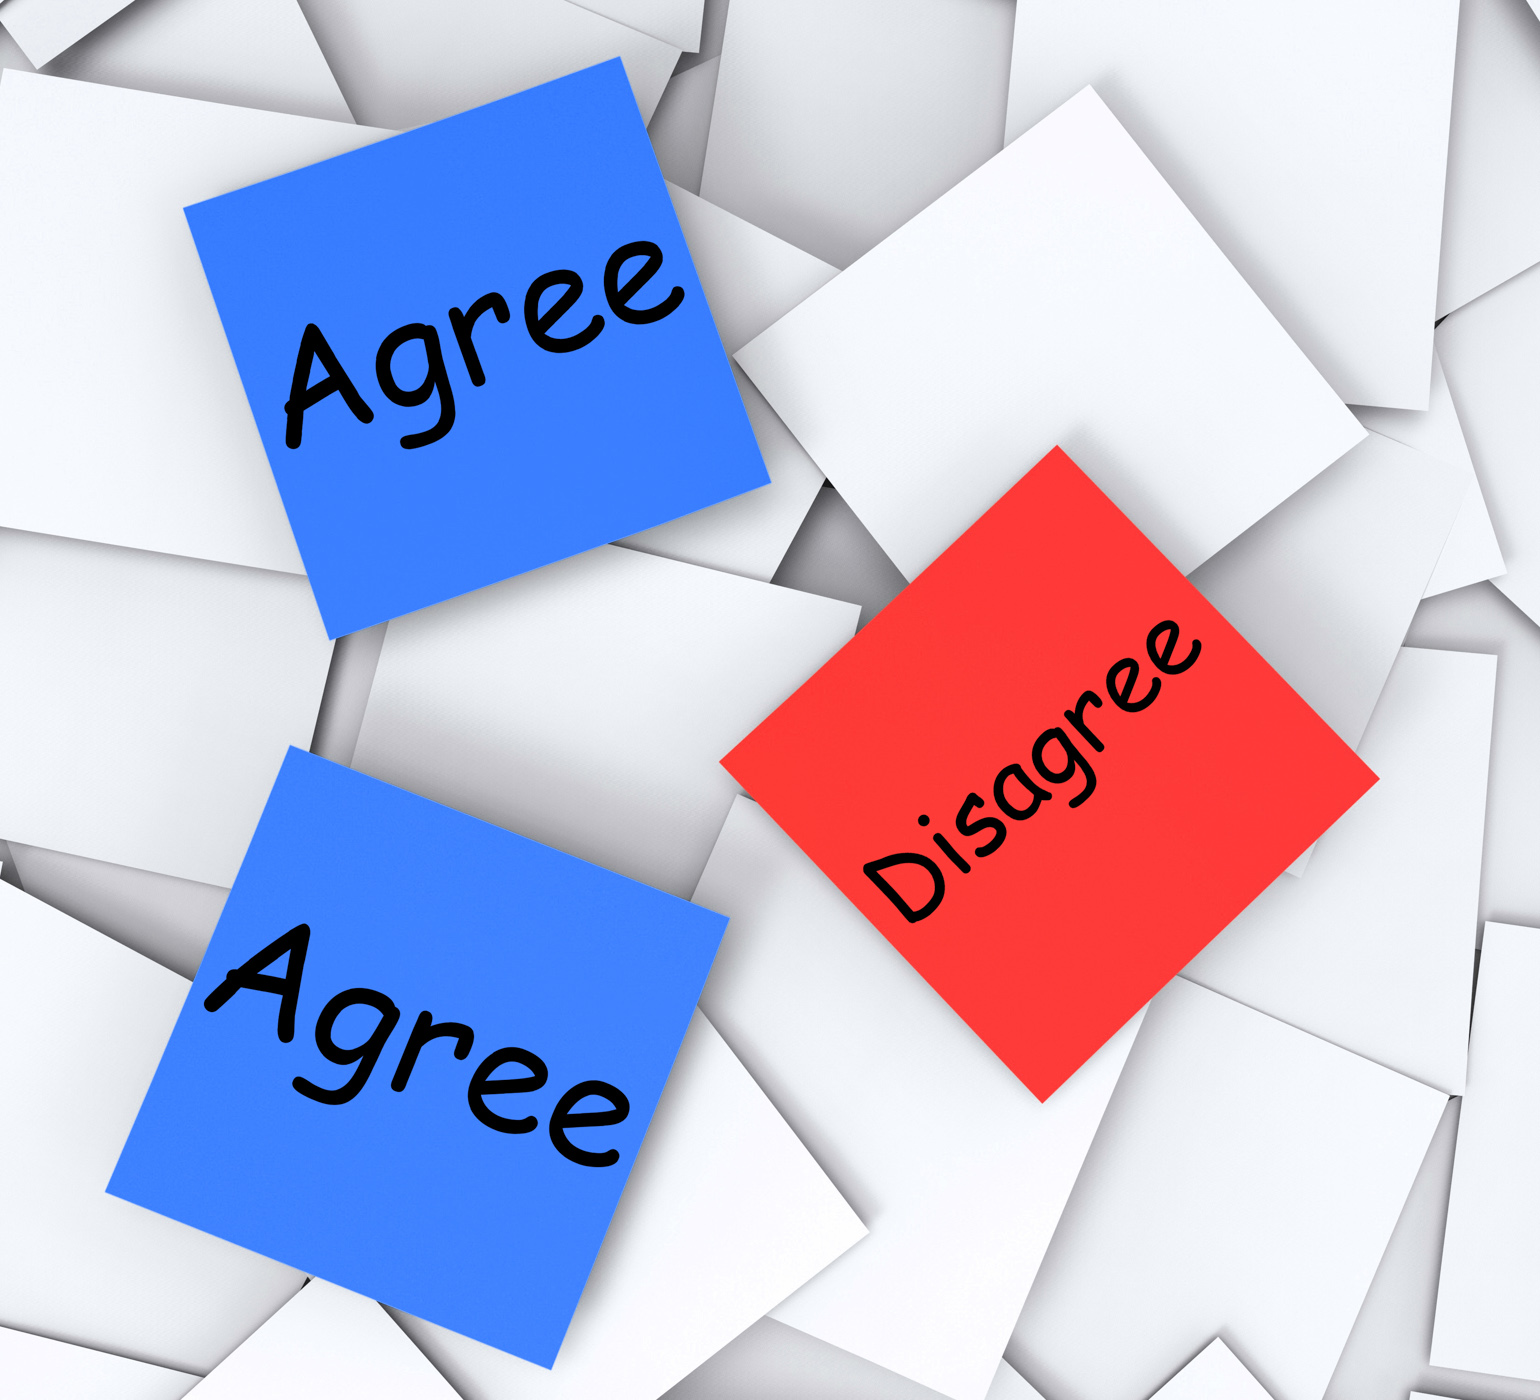 Agree disagree post-it notes mean opinion and point of view photo